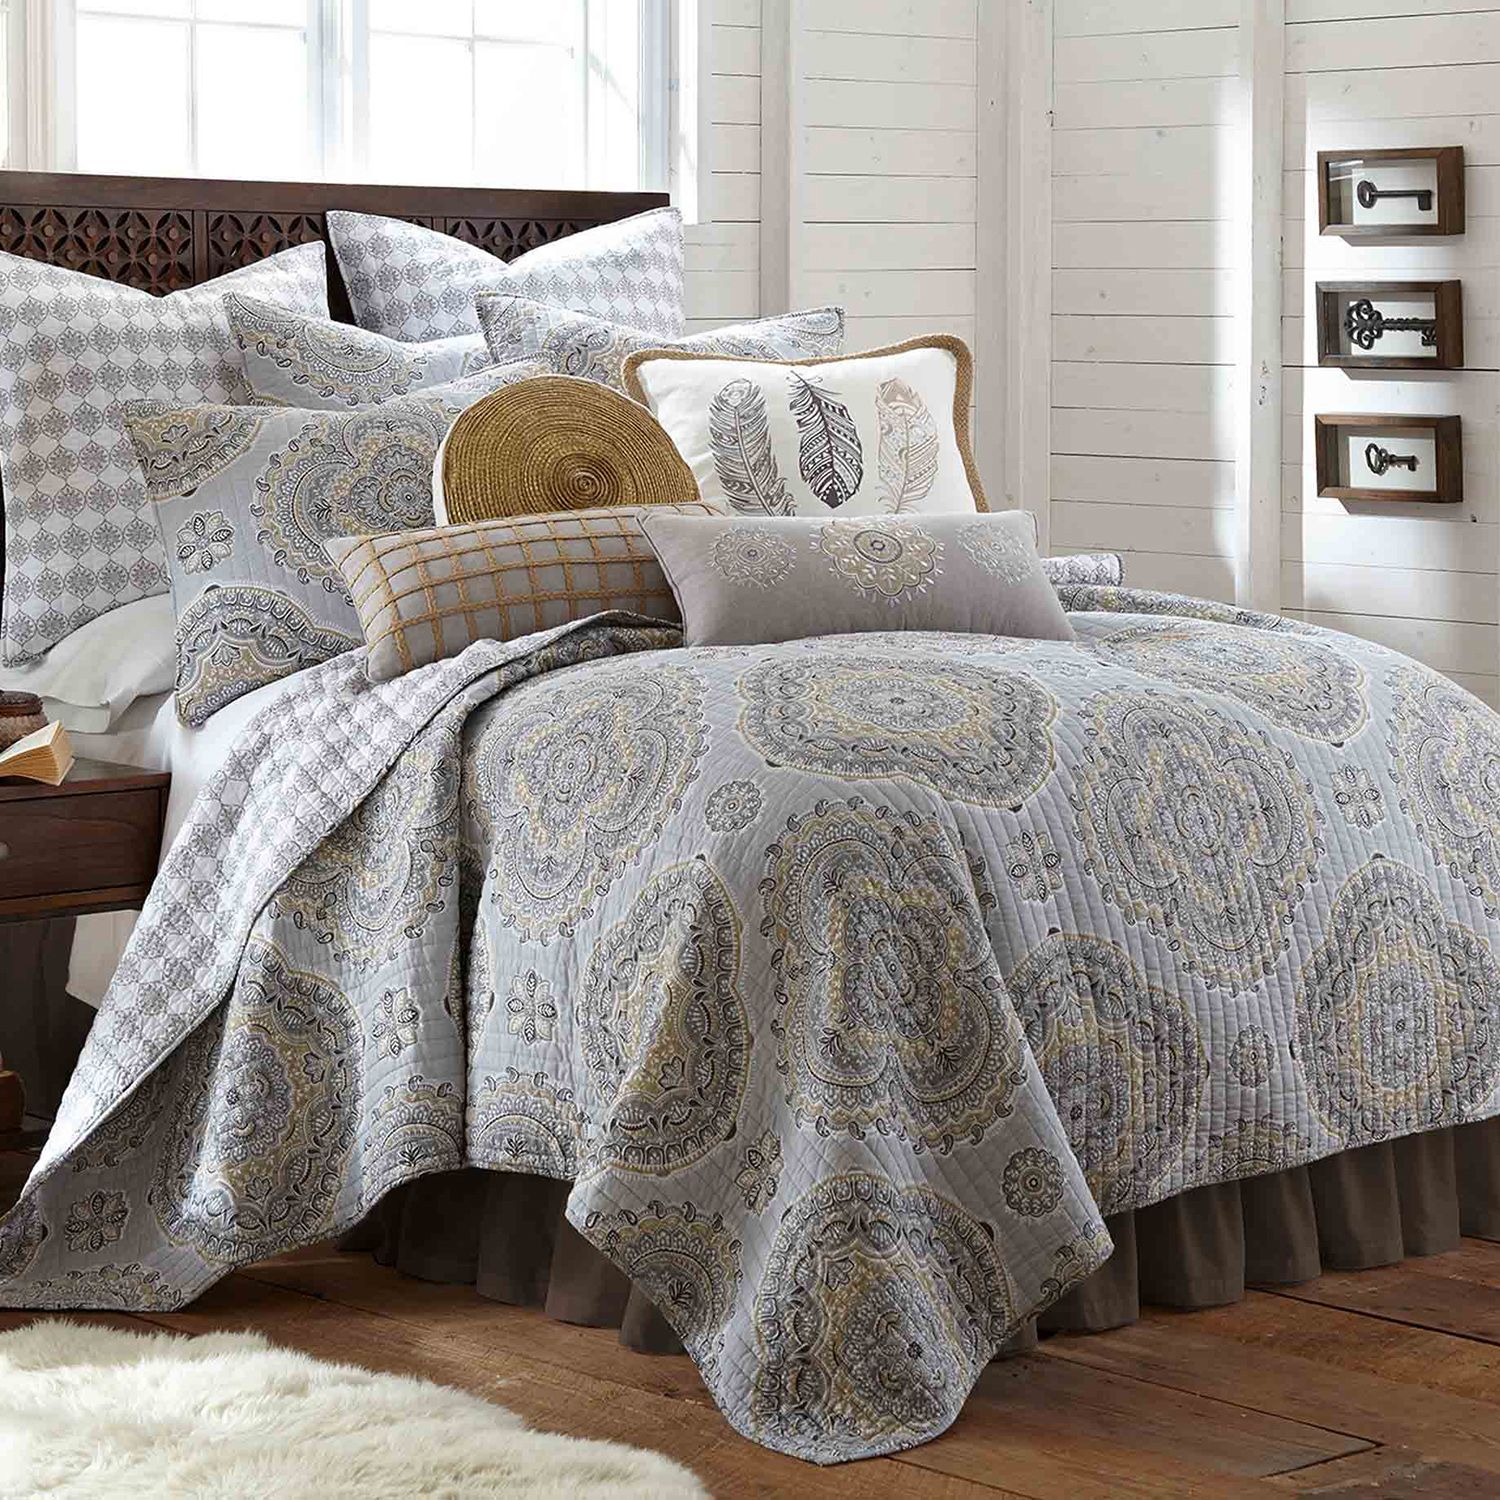 Image for Levtex Home Tammy Quilt Collection at Kohl's.